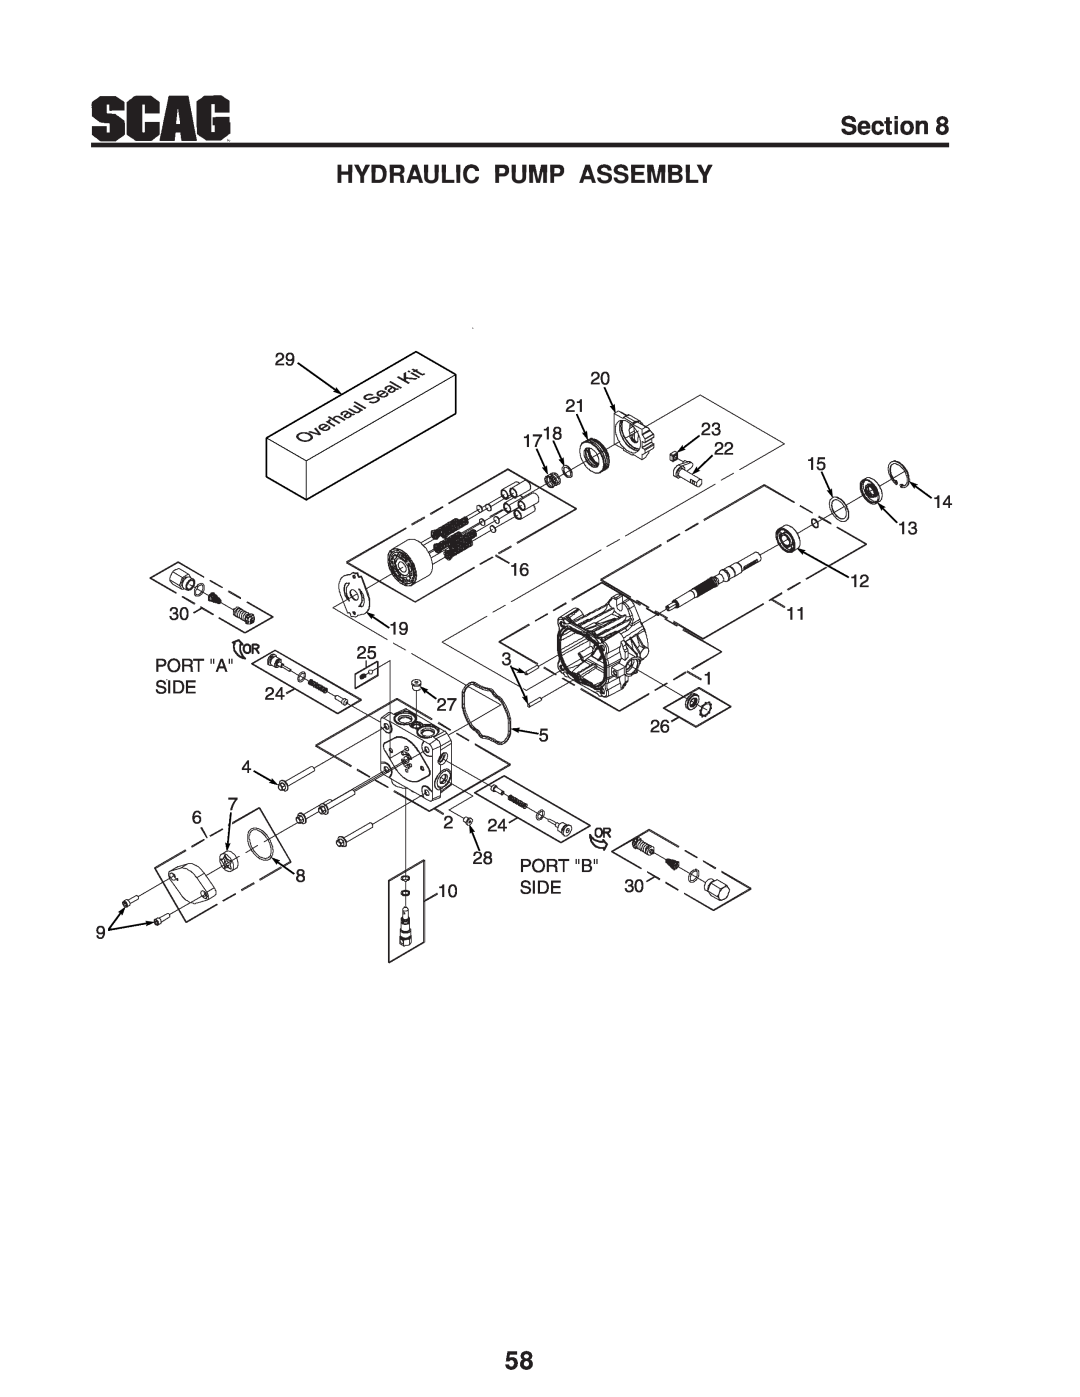 Scag Power Equipment SZC manual Section HYDRAULIC PUMP ASSEMBLY, Port A, Side, Port B 